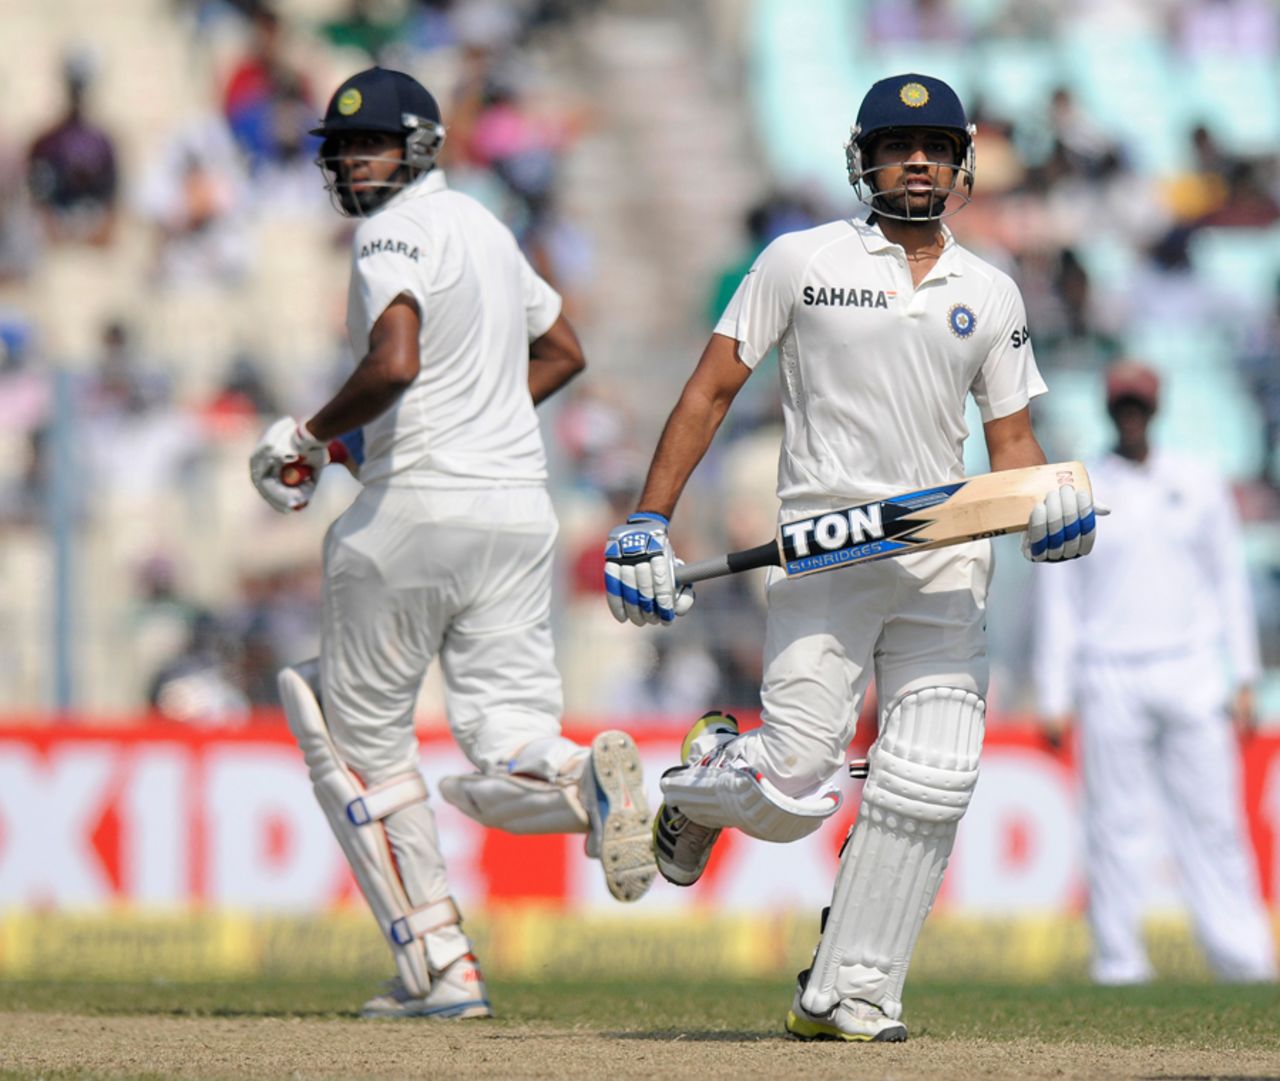 R Ashwin and Rohit Sharma put on a record 280 for the seventh wicket, India v West Indies, 1st Test, Kolkata, 3rd day, November 8, 2013